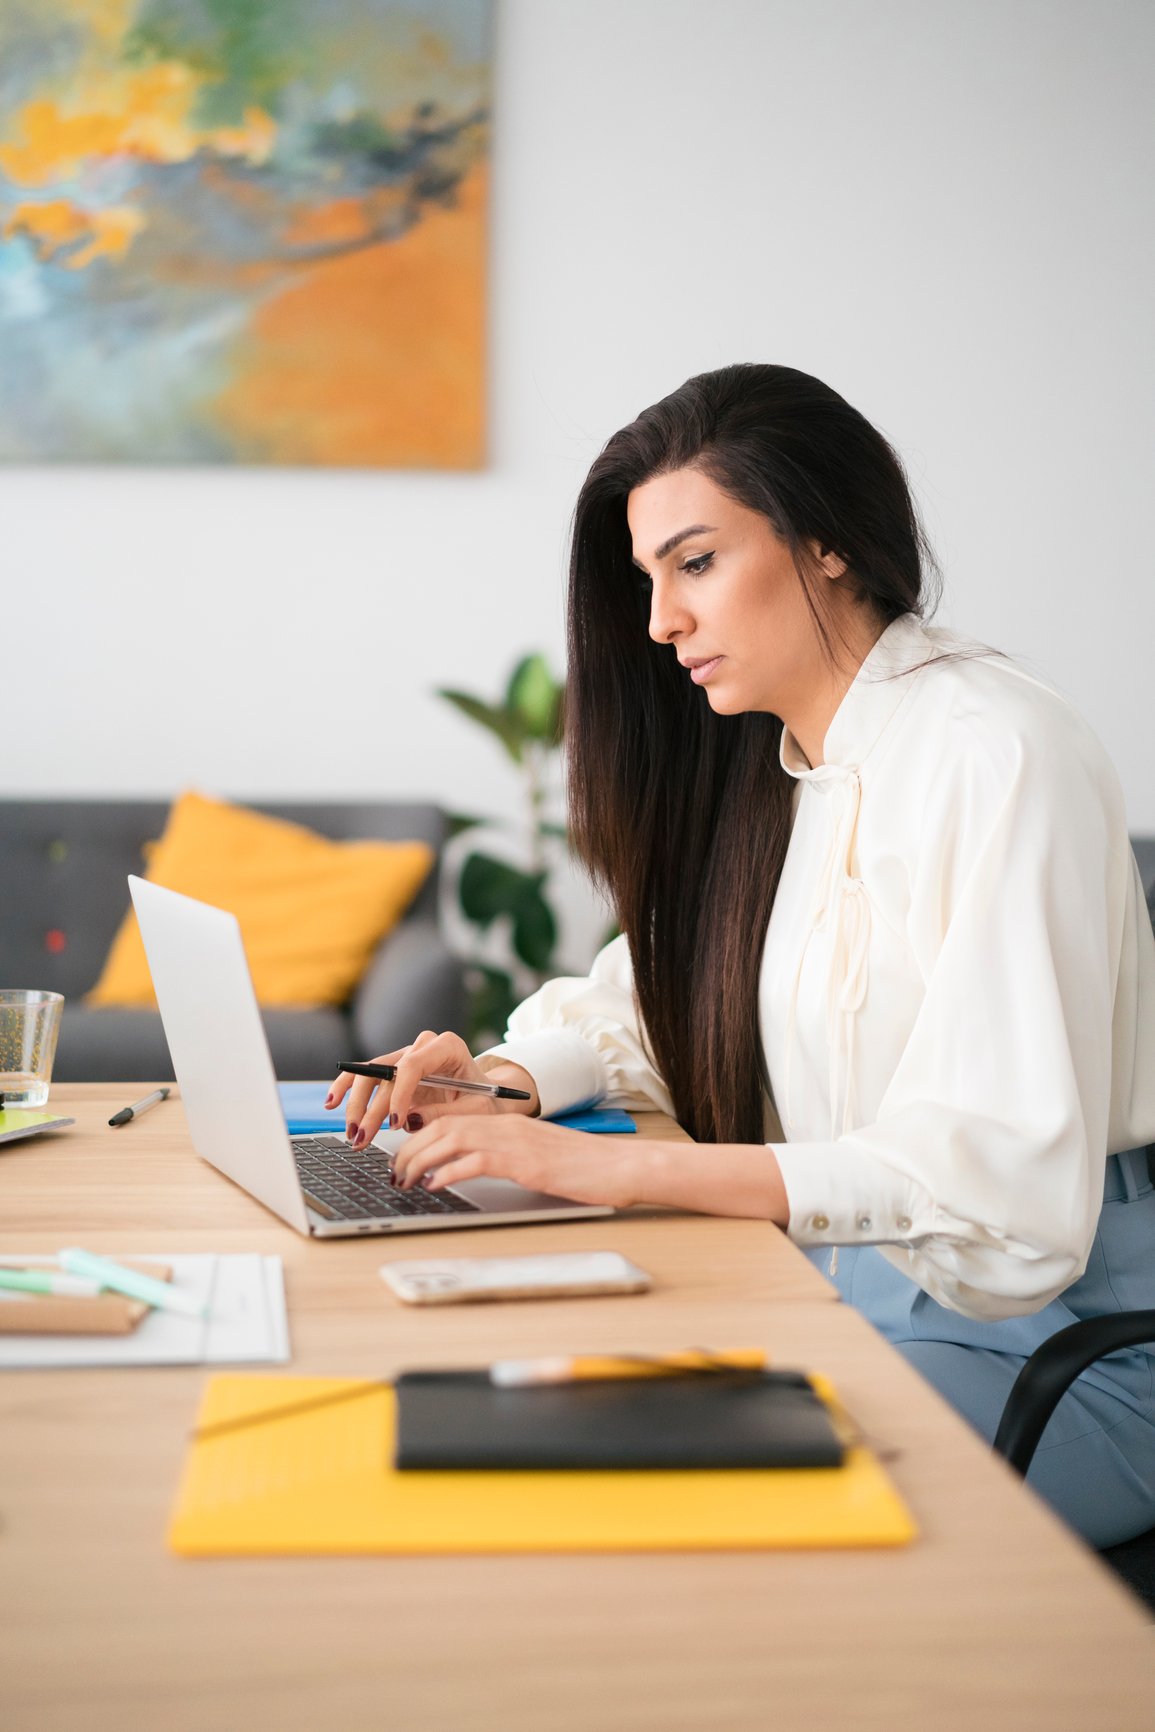 Footer Focused Female Working On Laptop In Office